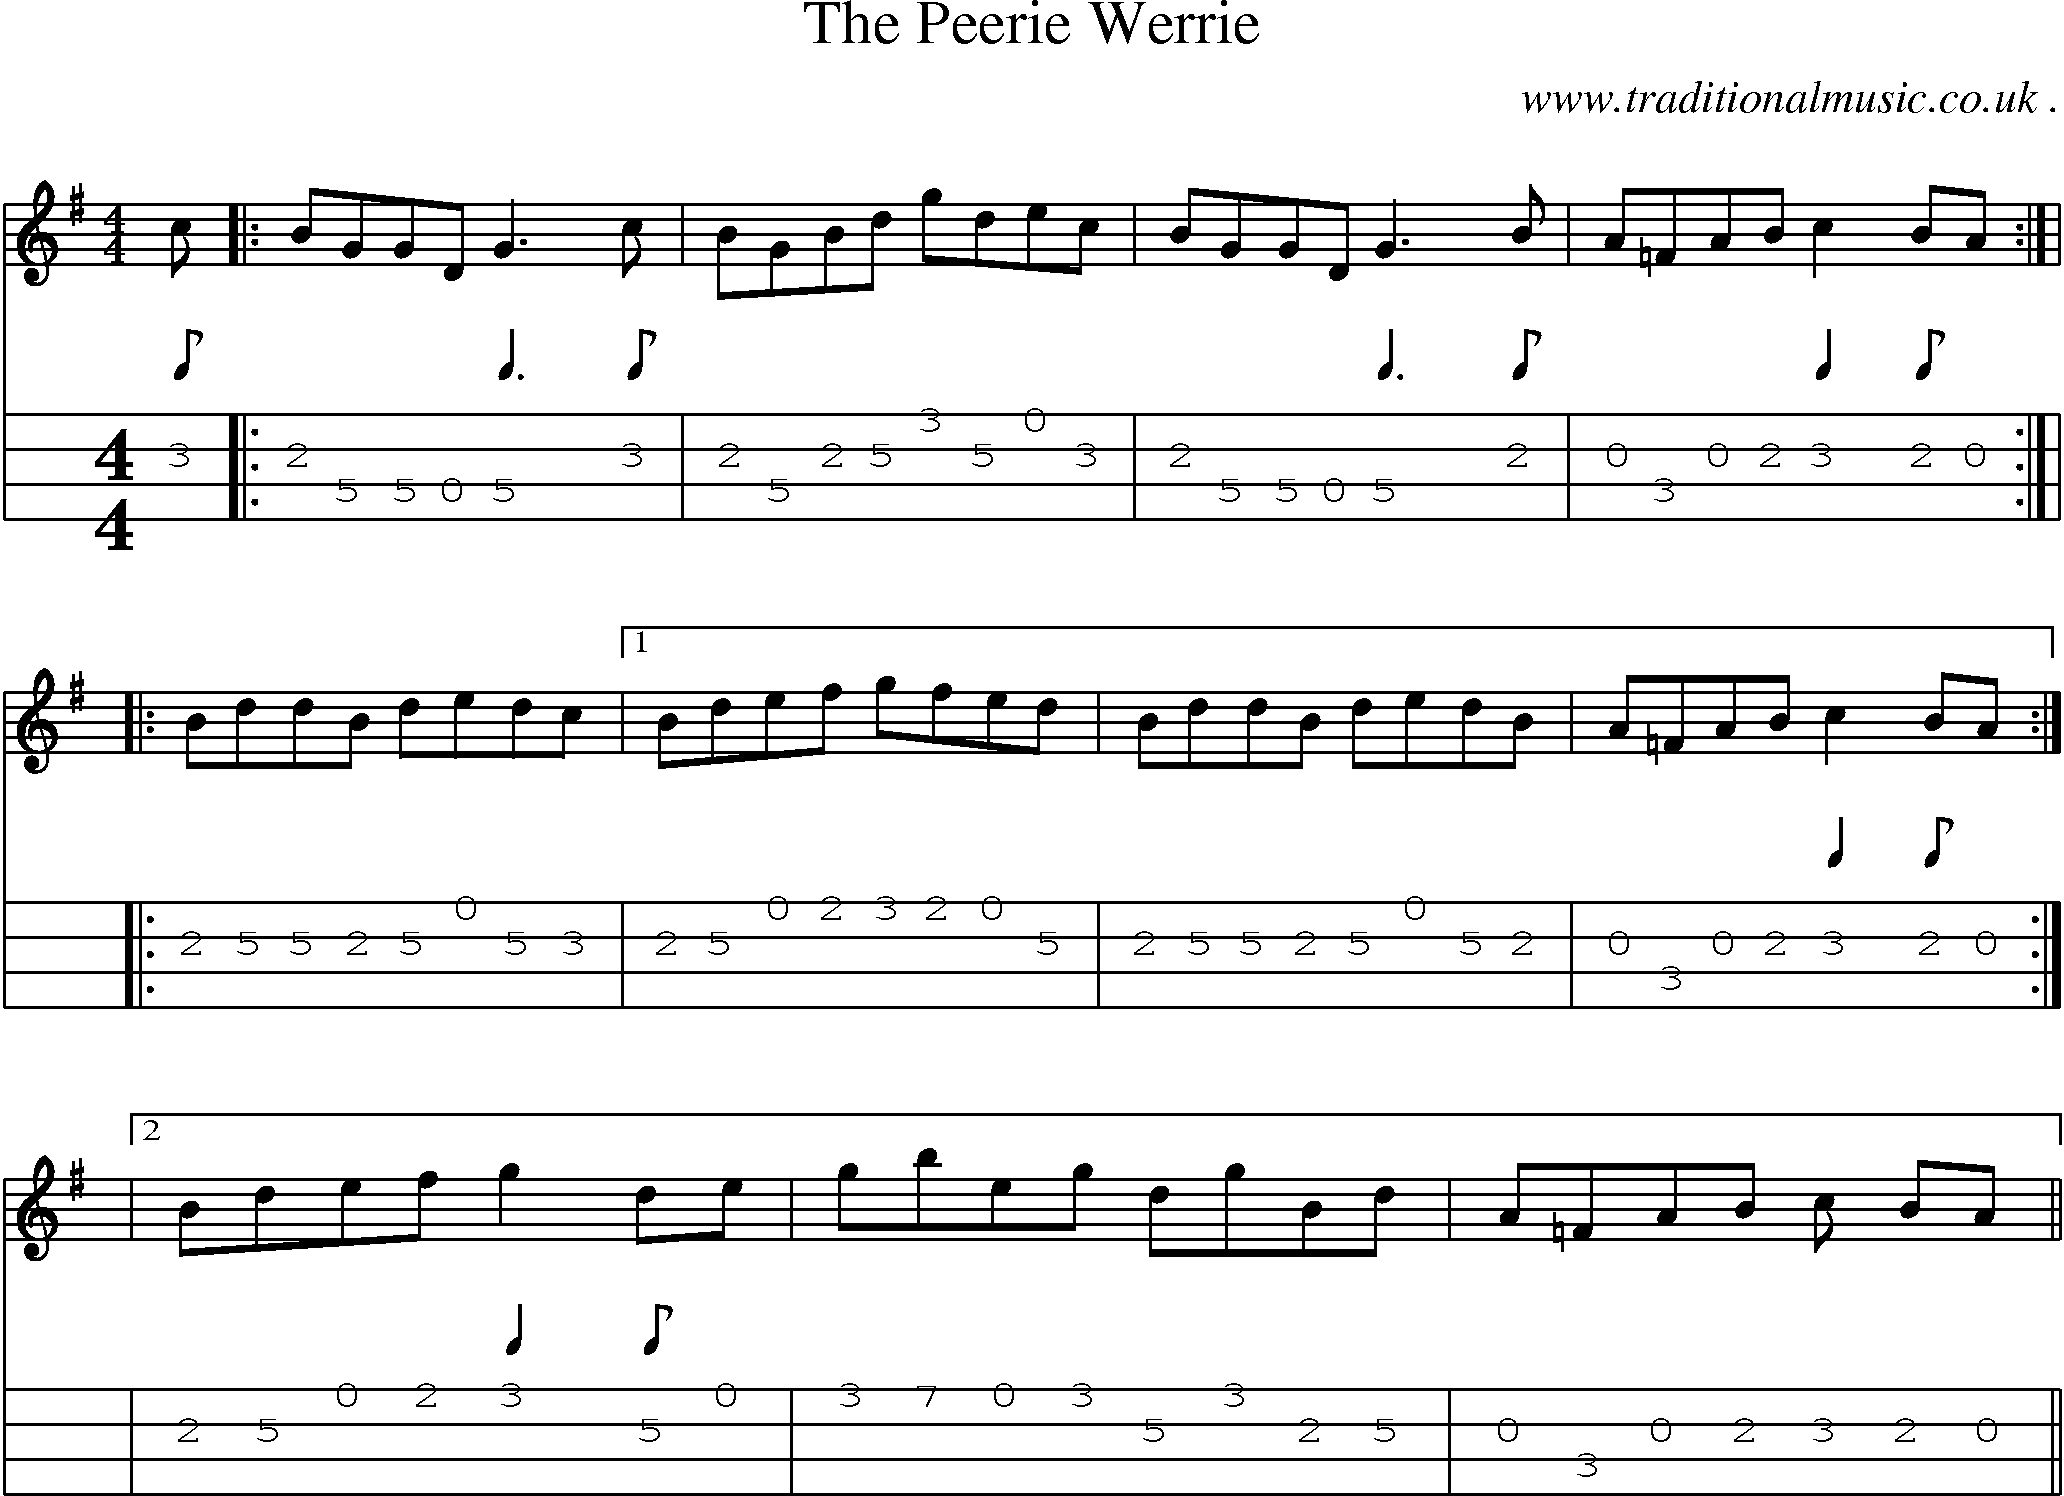 Music Score and Guitar Tabs for The Peerie Werrie